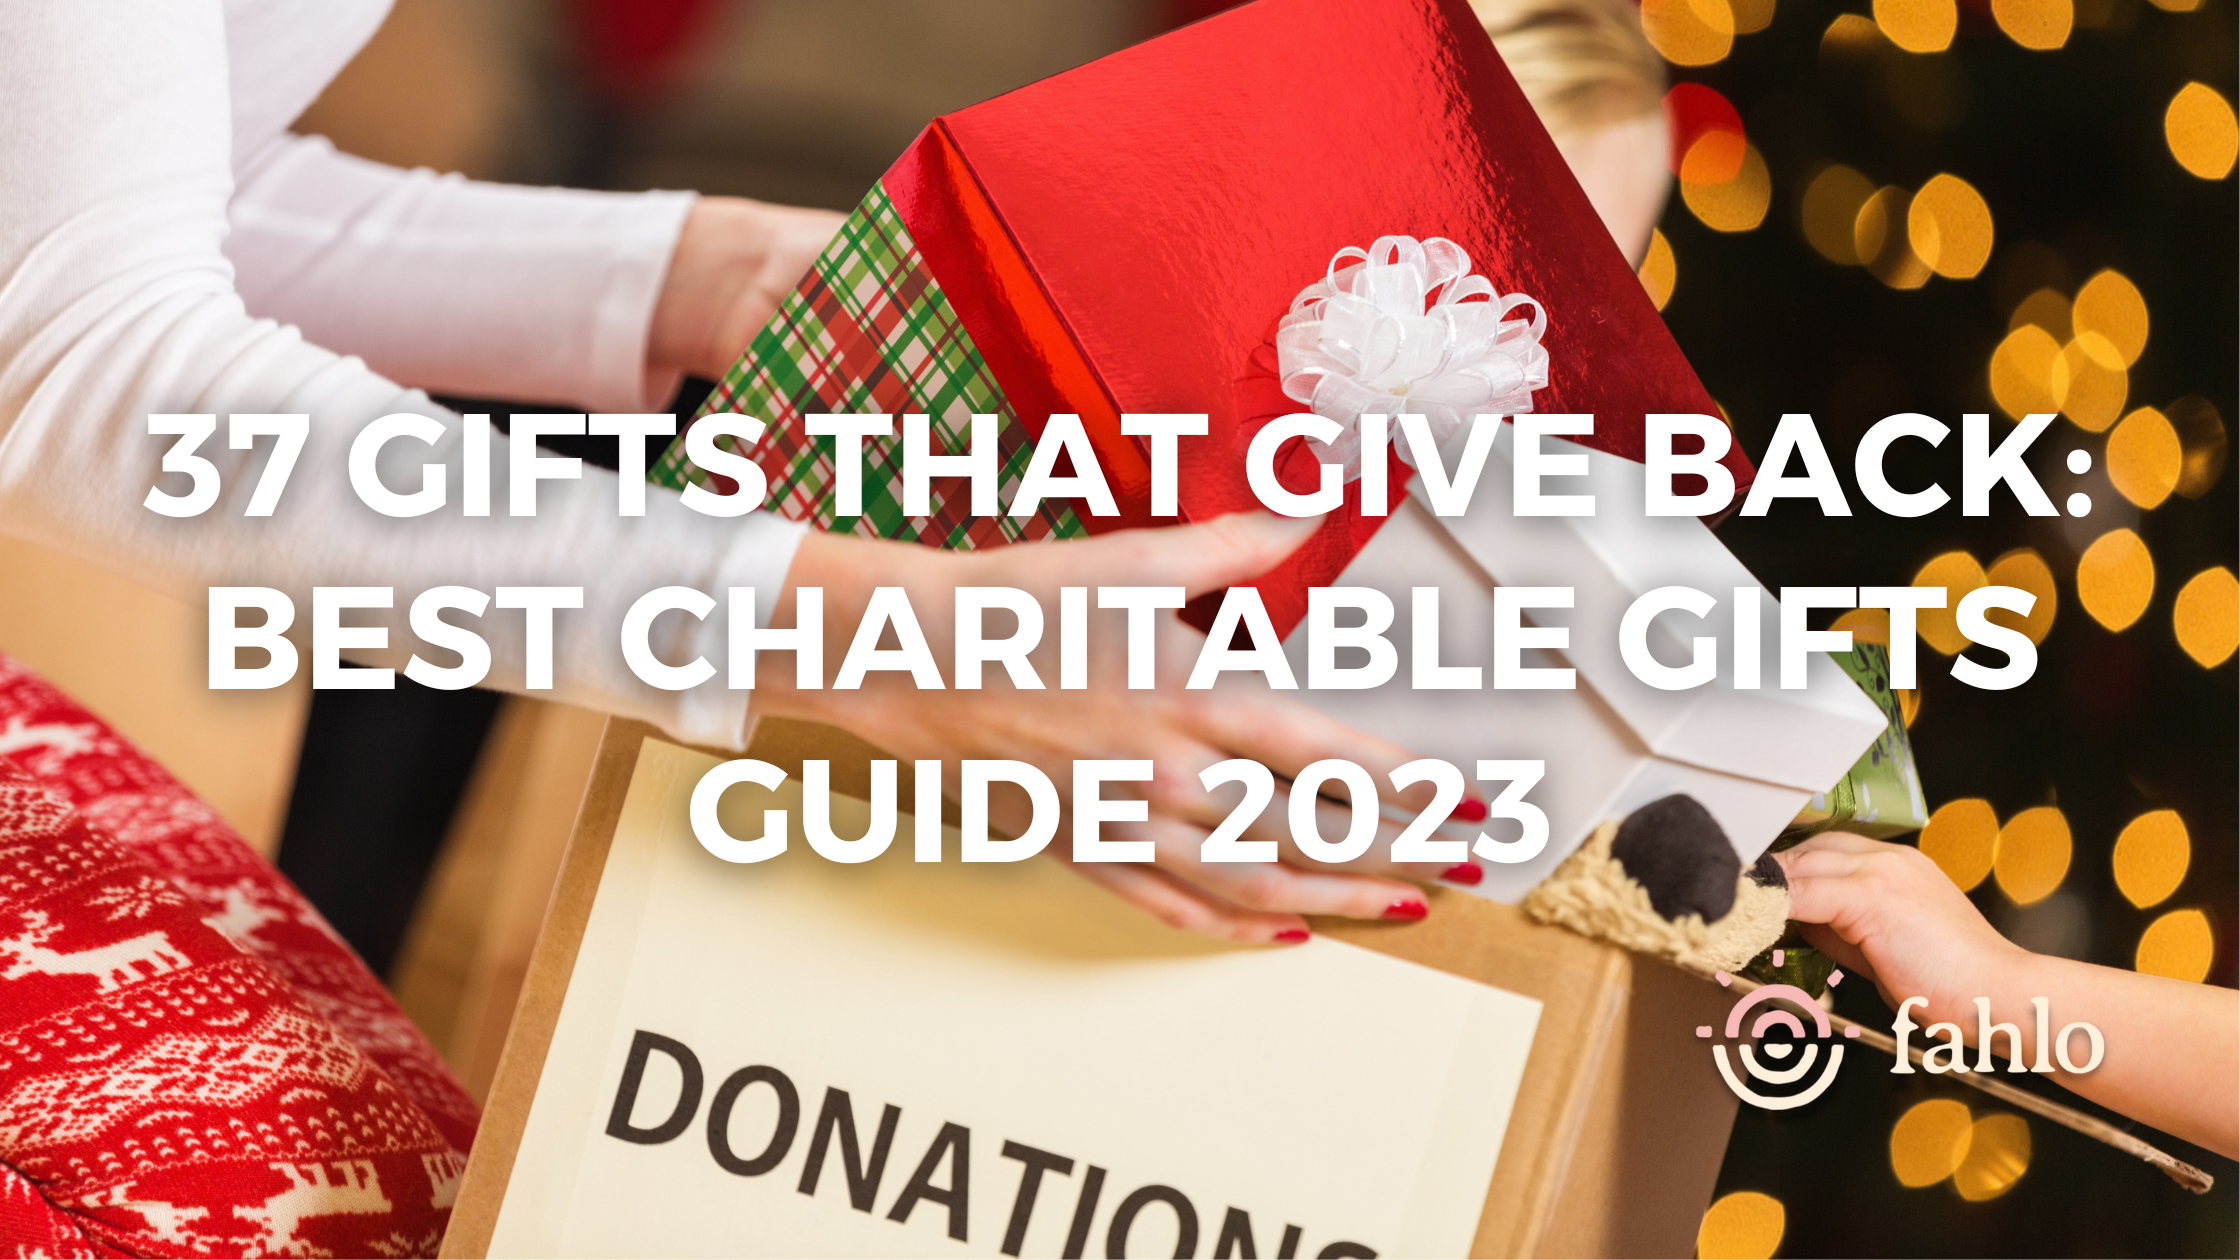 Best Charitable Gifts Guide